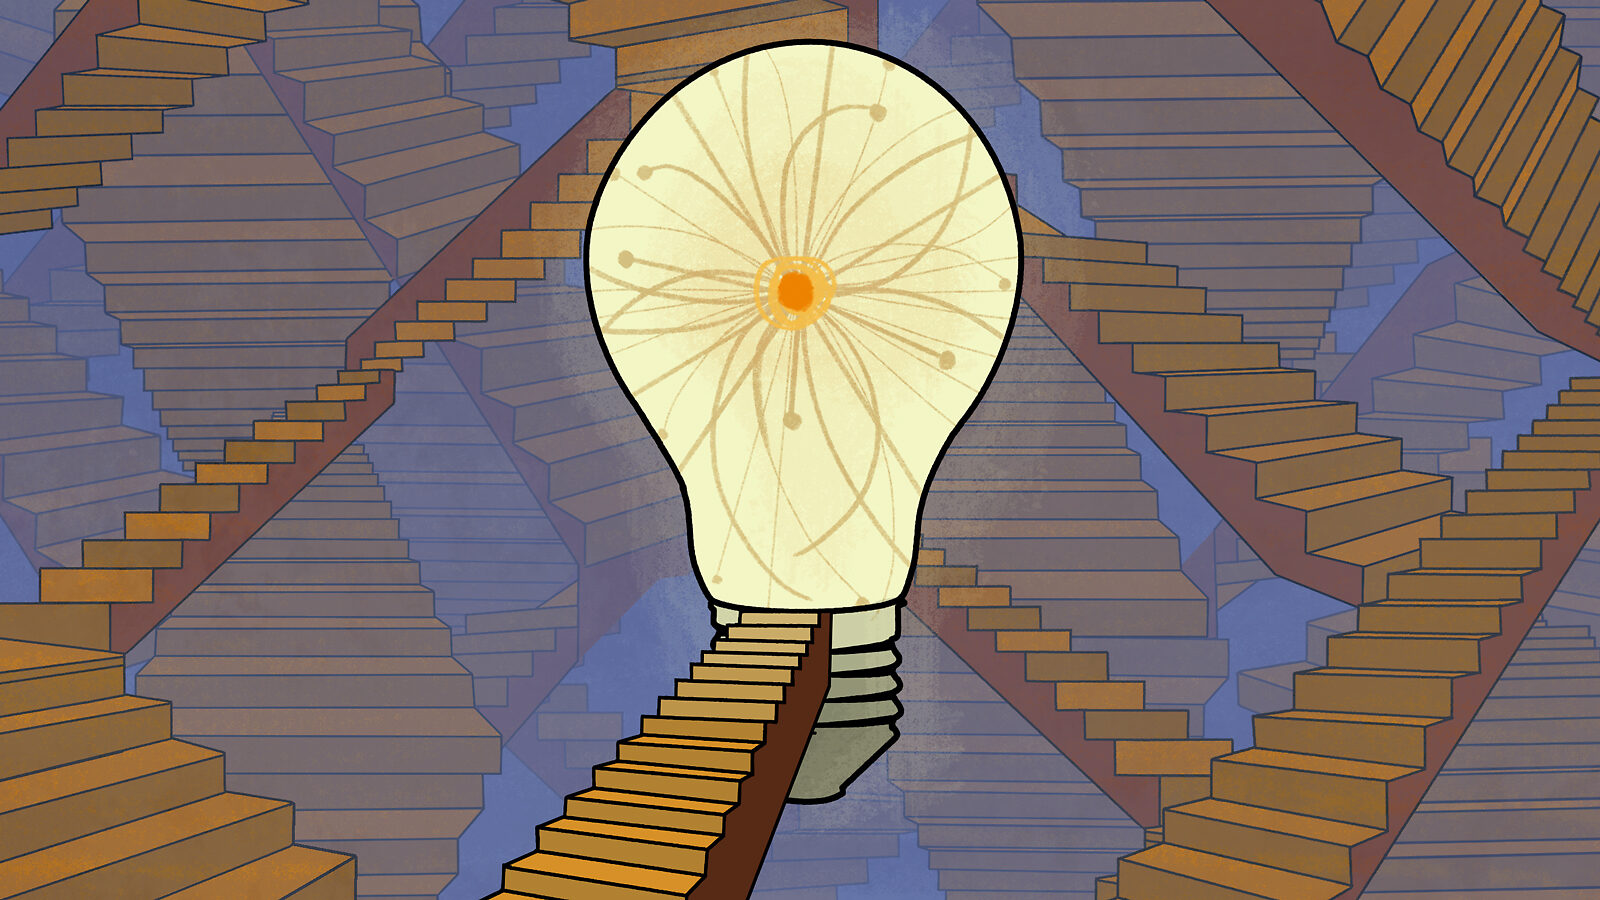 Illustration: Staircase leads to an idea